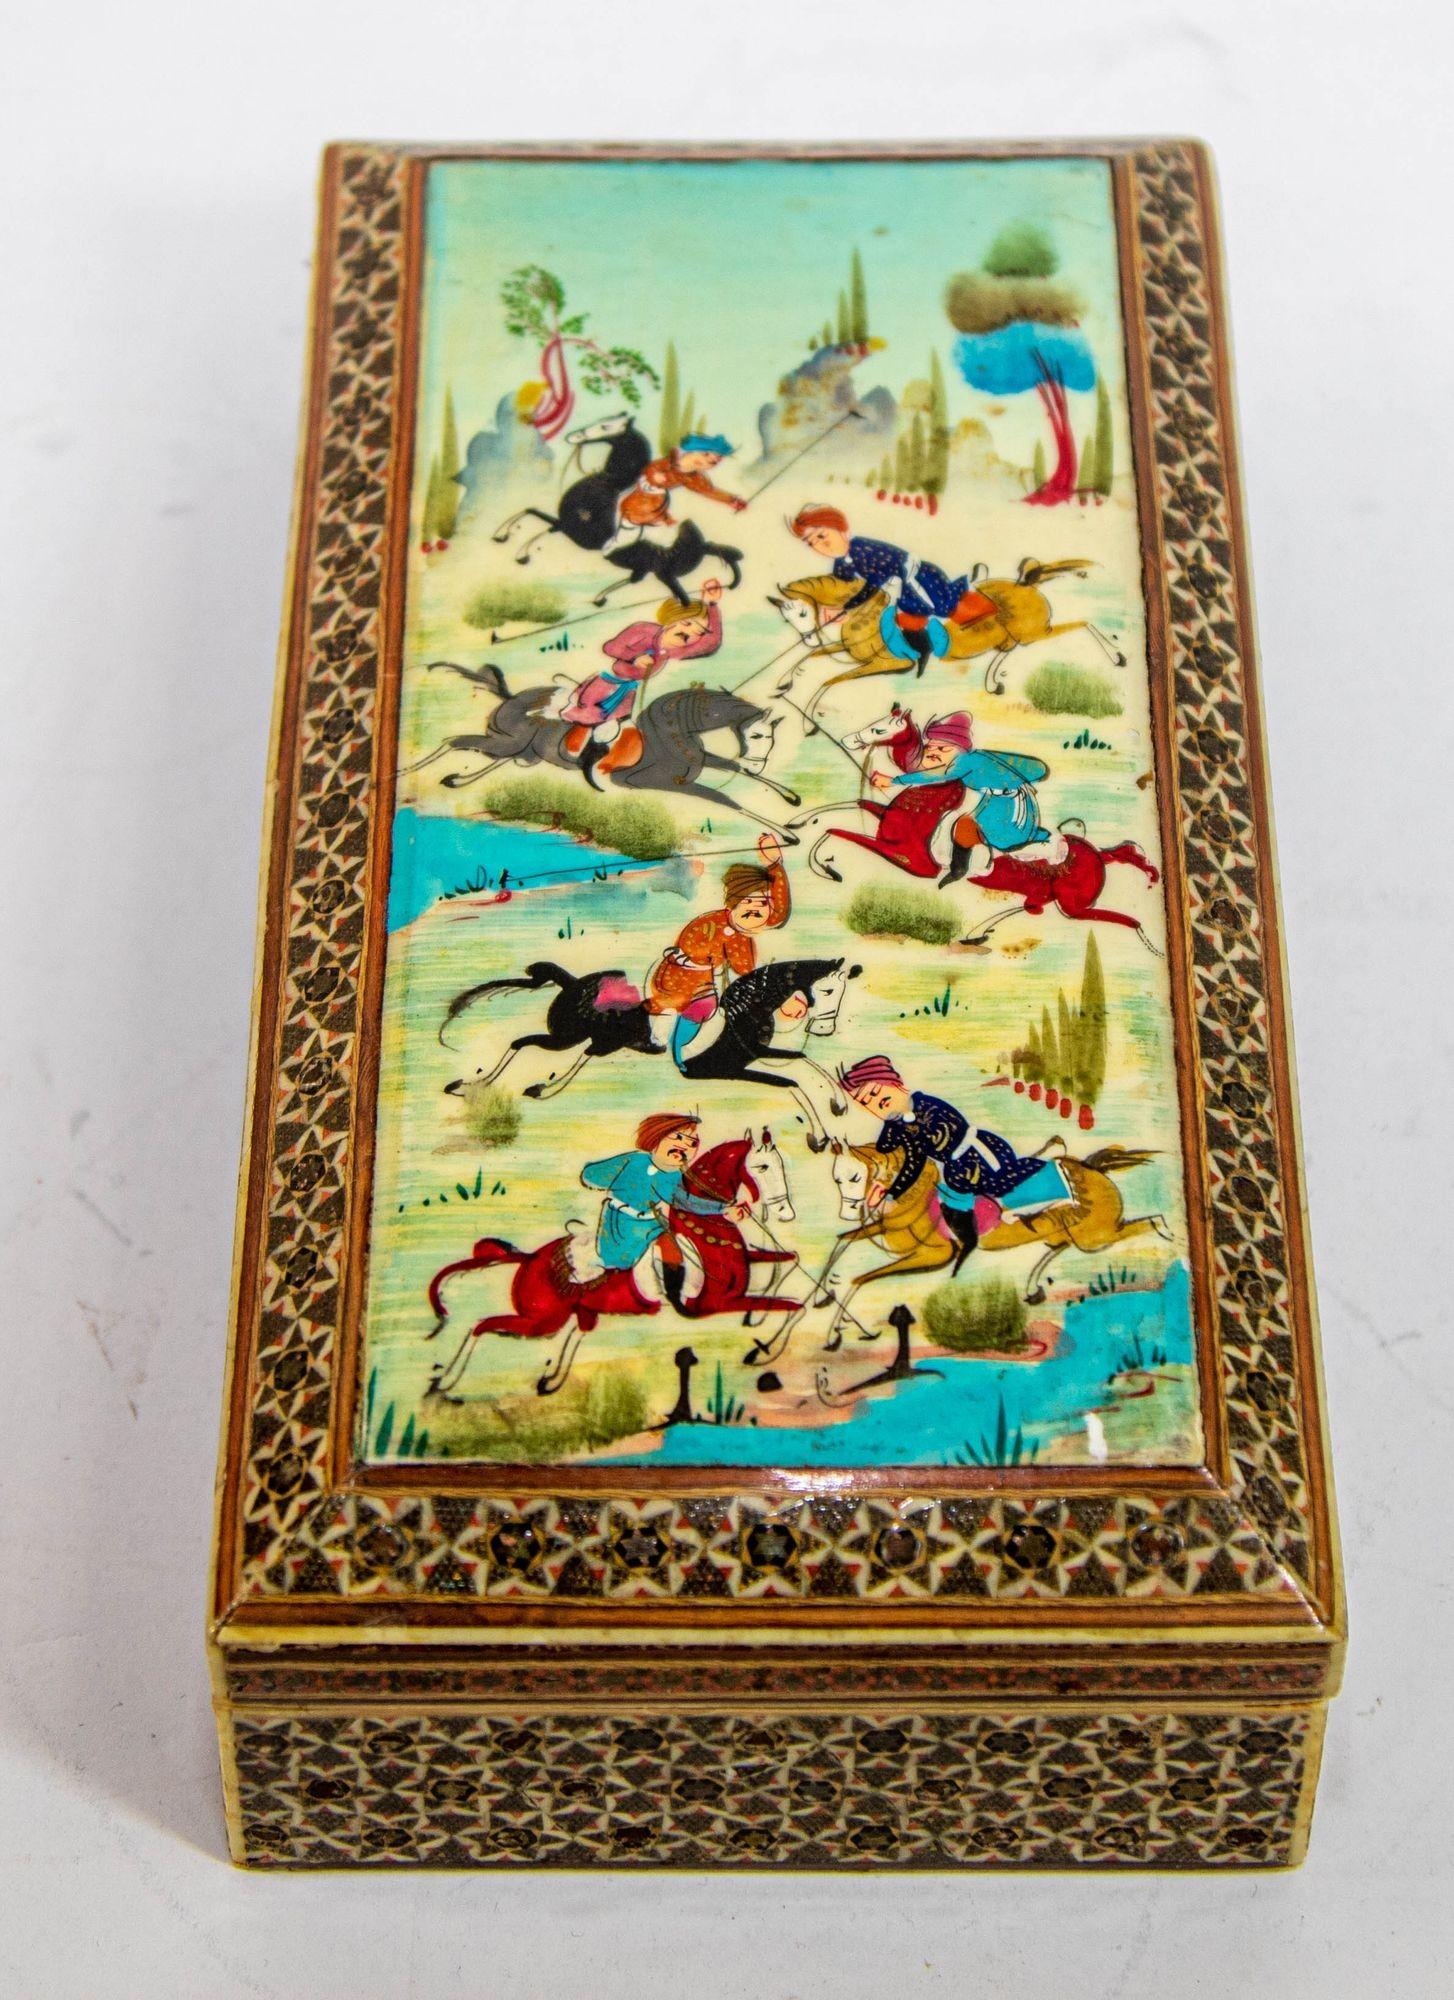 Fine antique large handcrafted vintage marquetry Indo Persian wood inlay micro mosaic with miniature hand painted scene.
Fine Antique handcrafted precious box micro mosaic inlaid in geometric design and with a miniature Islamic painting scene of men